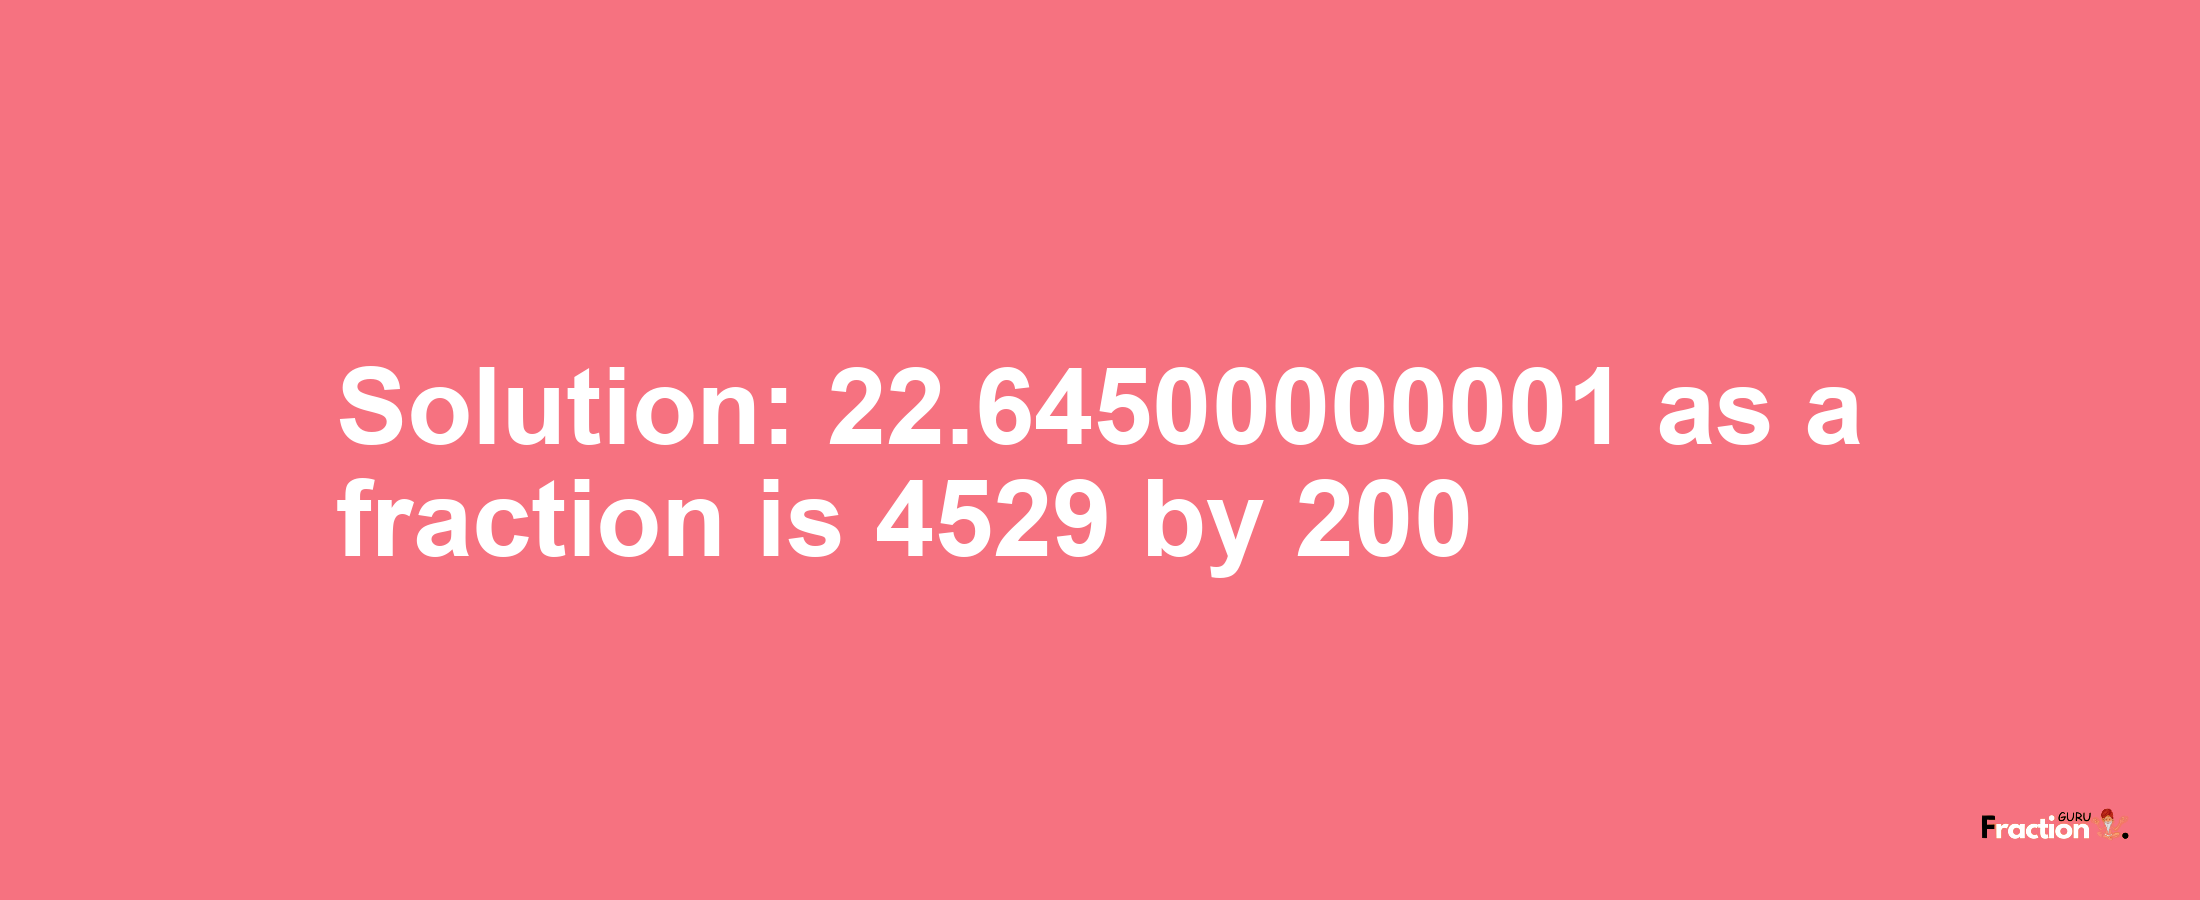 Solution:22.64500000001 as a fraction is 4529/200